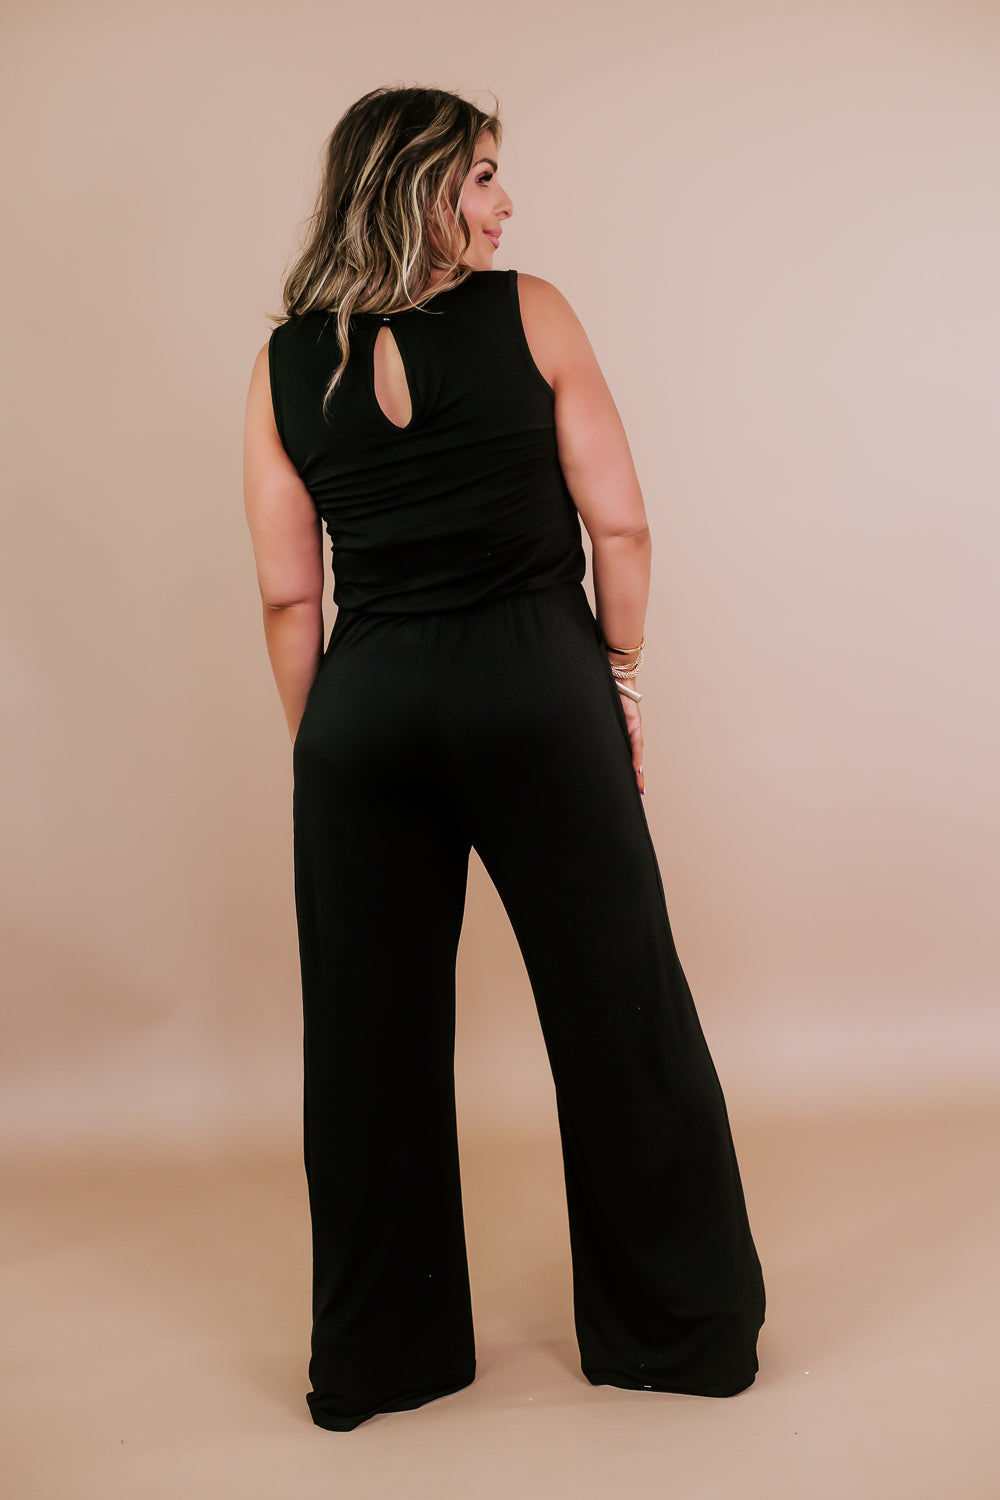 ECB Exclusive: Ready for Anything Jumpsuit, Black